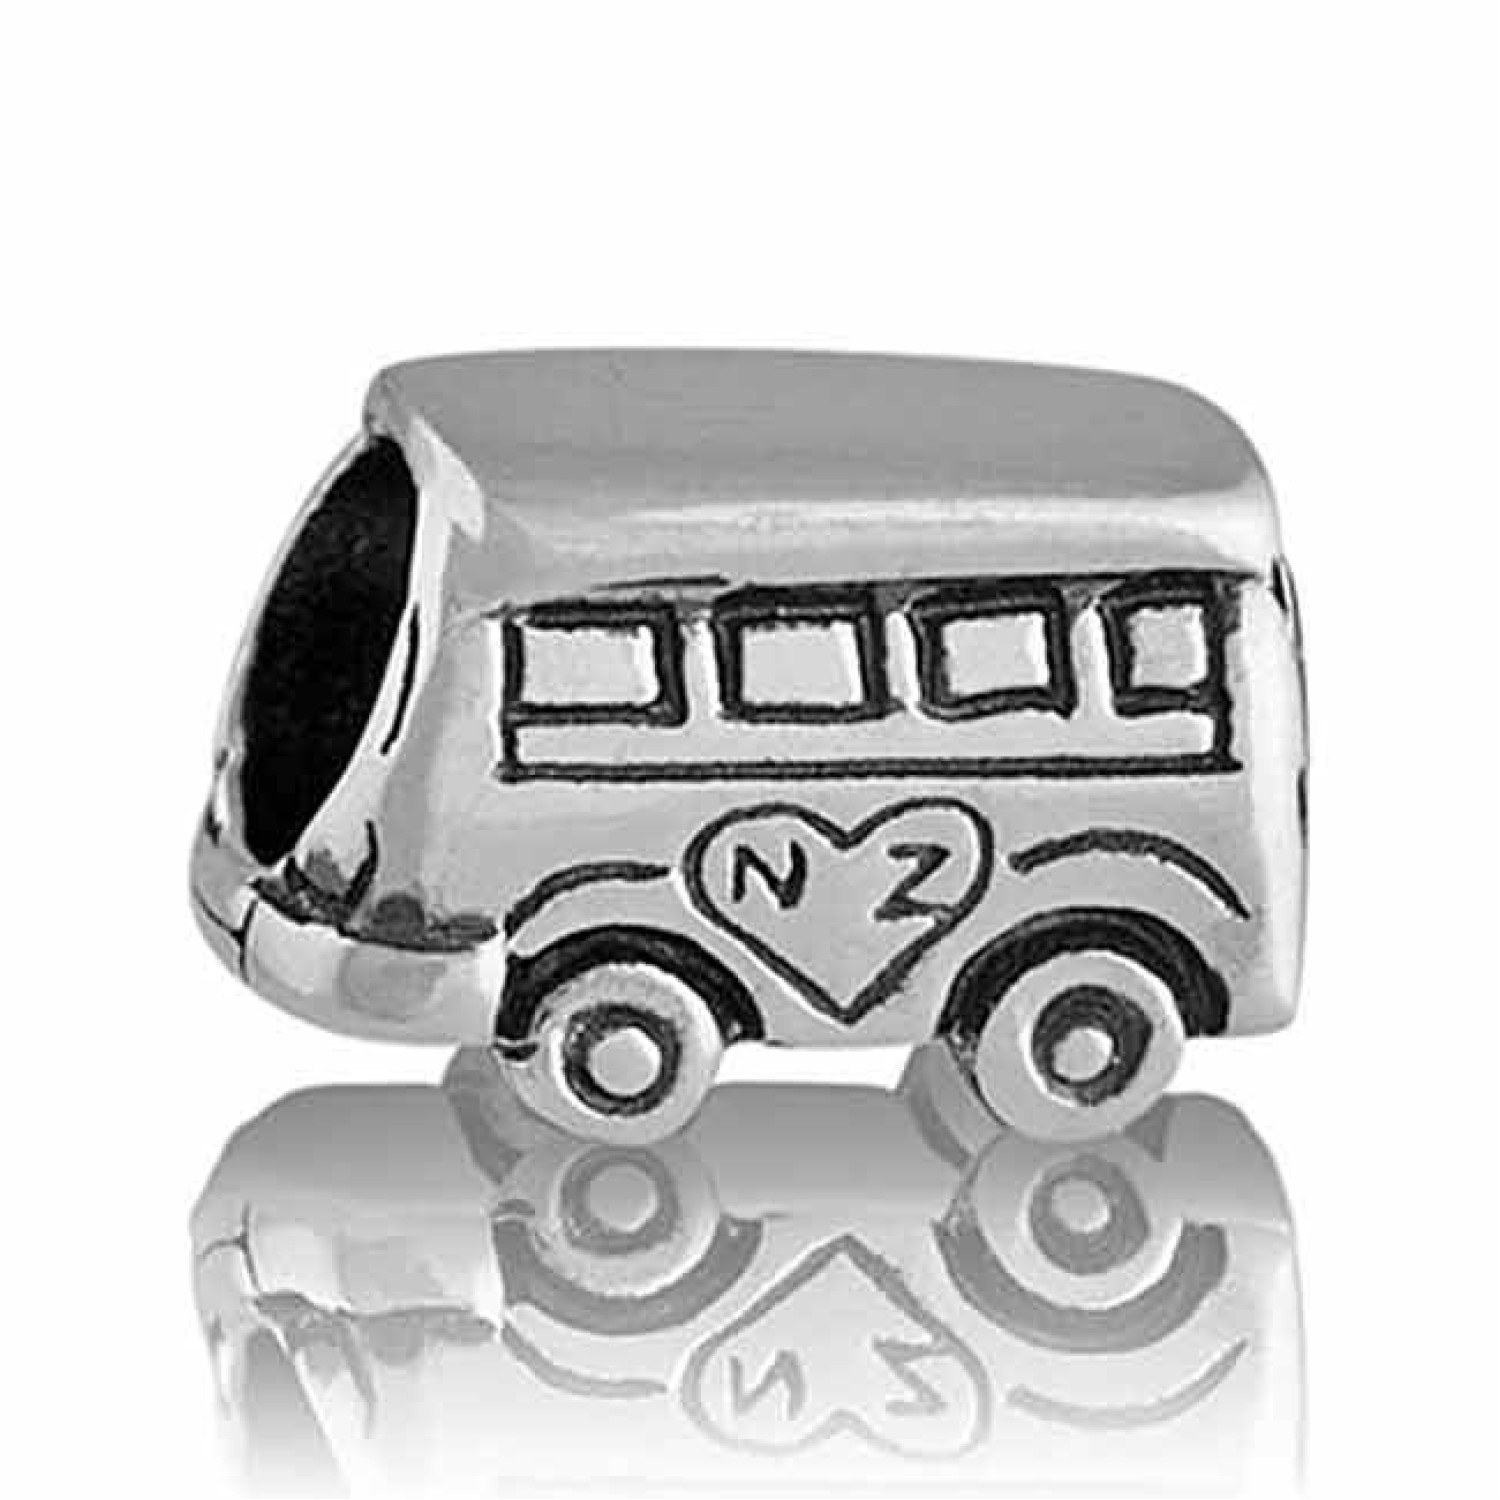 LK047 NZ Combie Van - The Ultimate Road Trip. The ultimate road trip. Sterling Silver Christies exclusive 5 year guarantee compatible with all other major brands Bracelets But not compatible with Lovelinks Bracelets (Non Universal Type) @christies.online